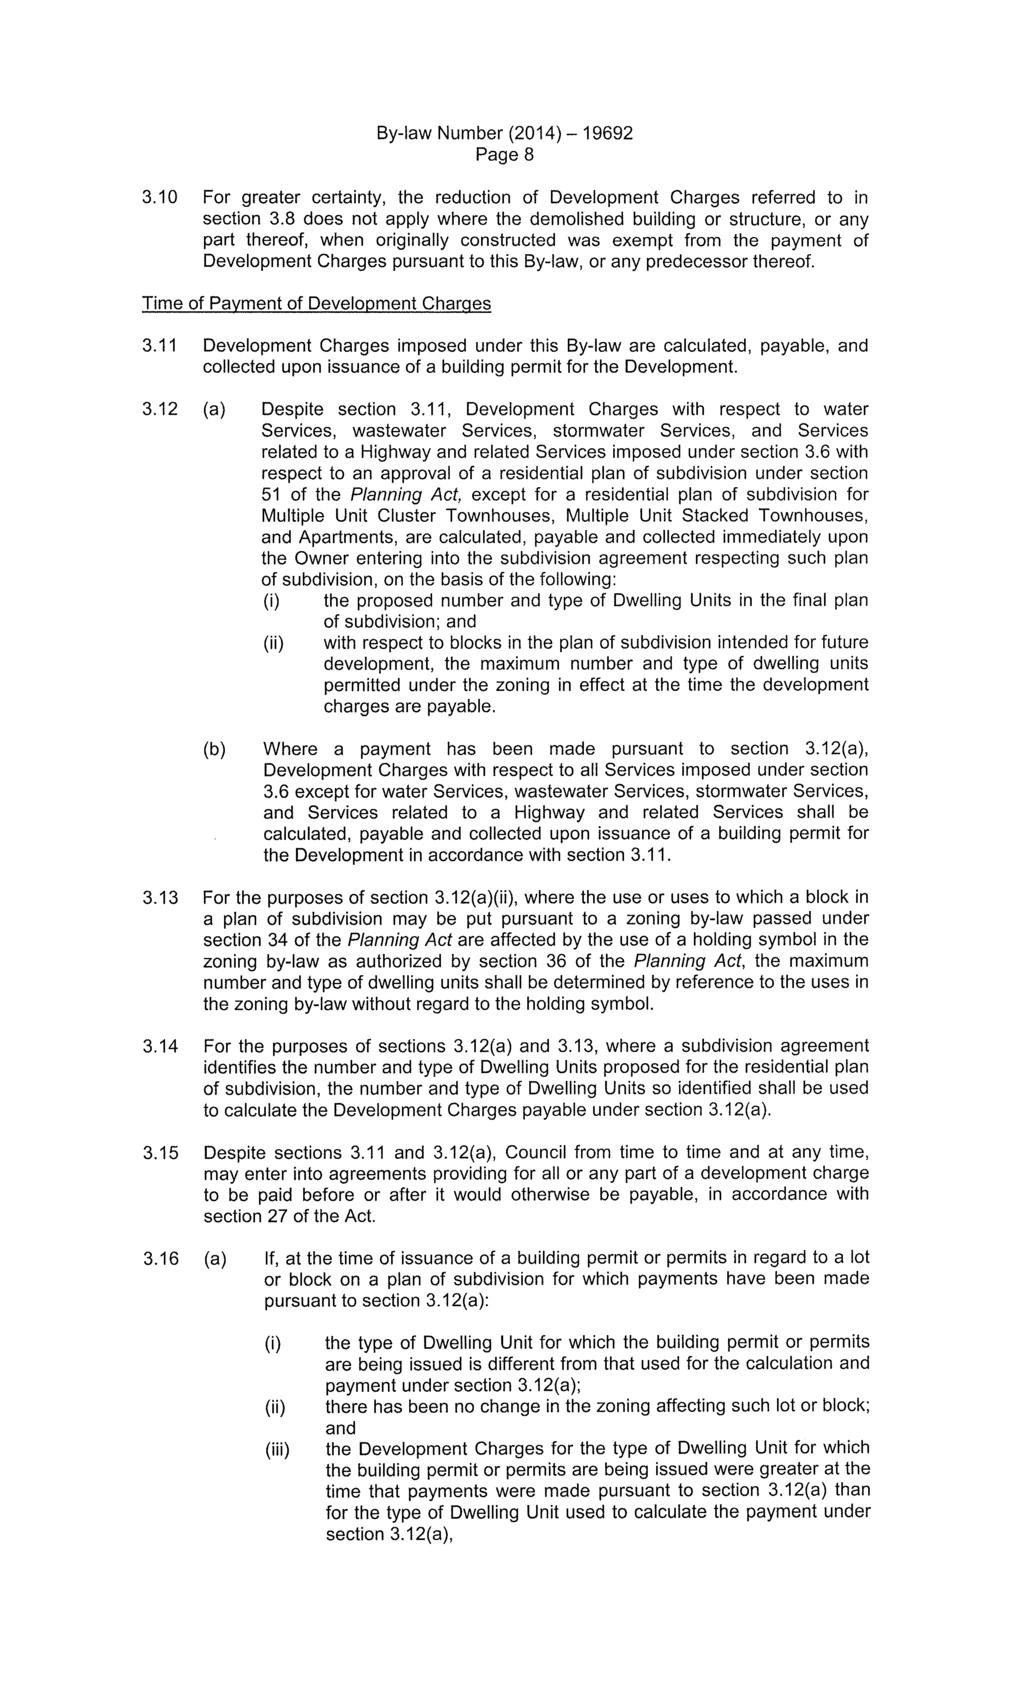 By-law Number (2014) -19692 Page 8 3.10 For greater certainty, the reduction of Development Charges referred to in section 3.